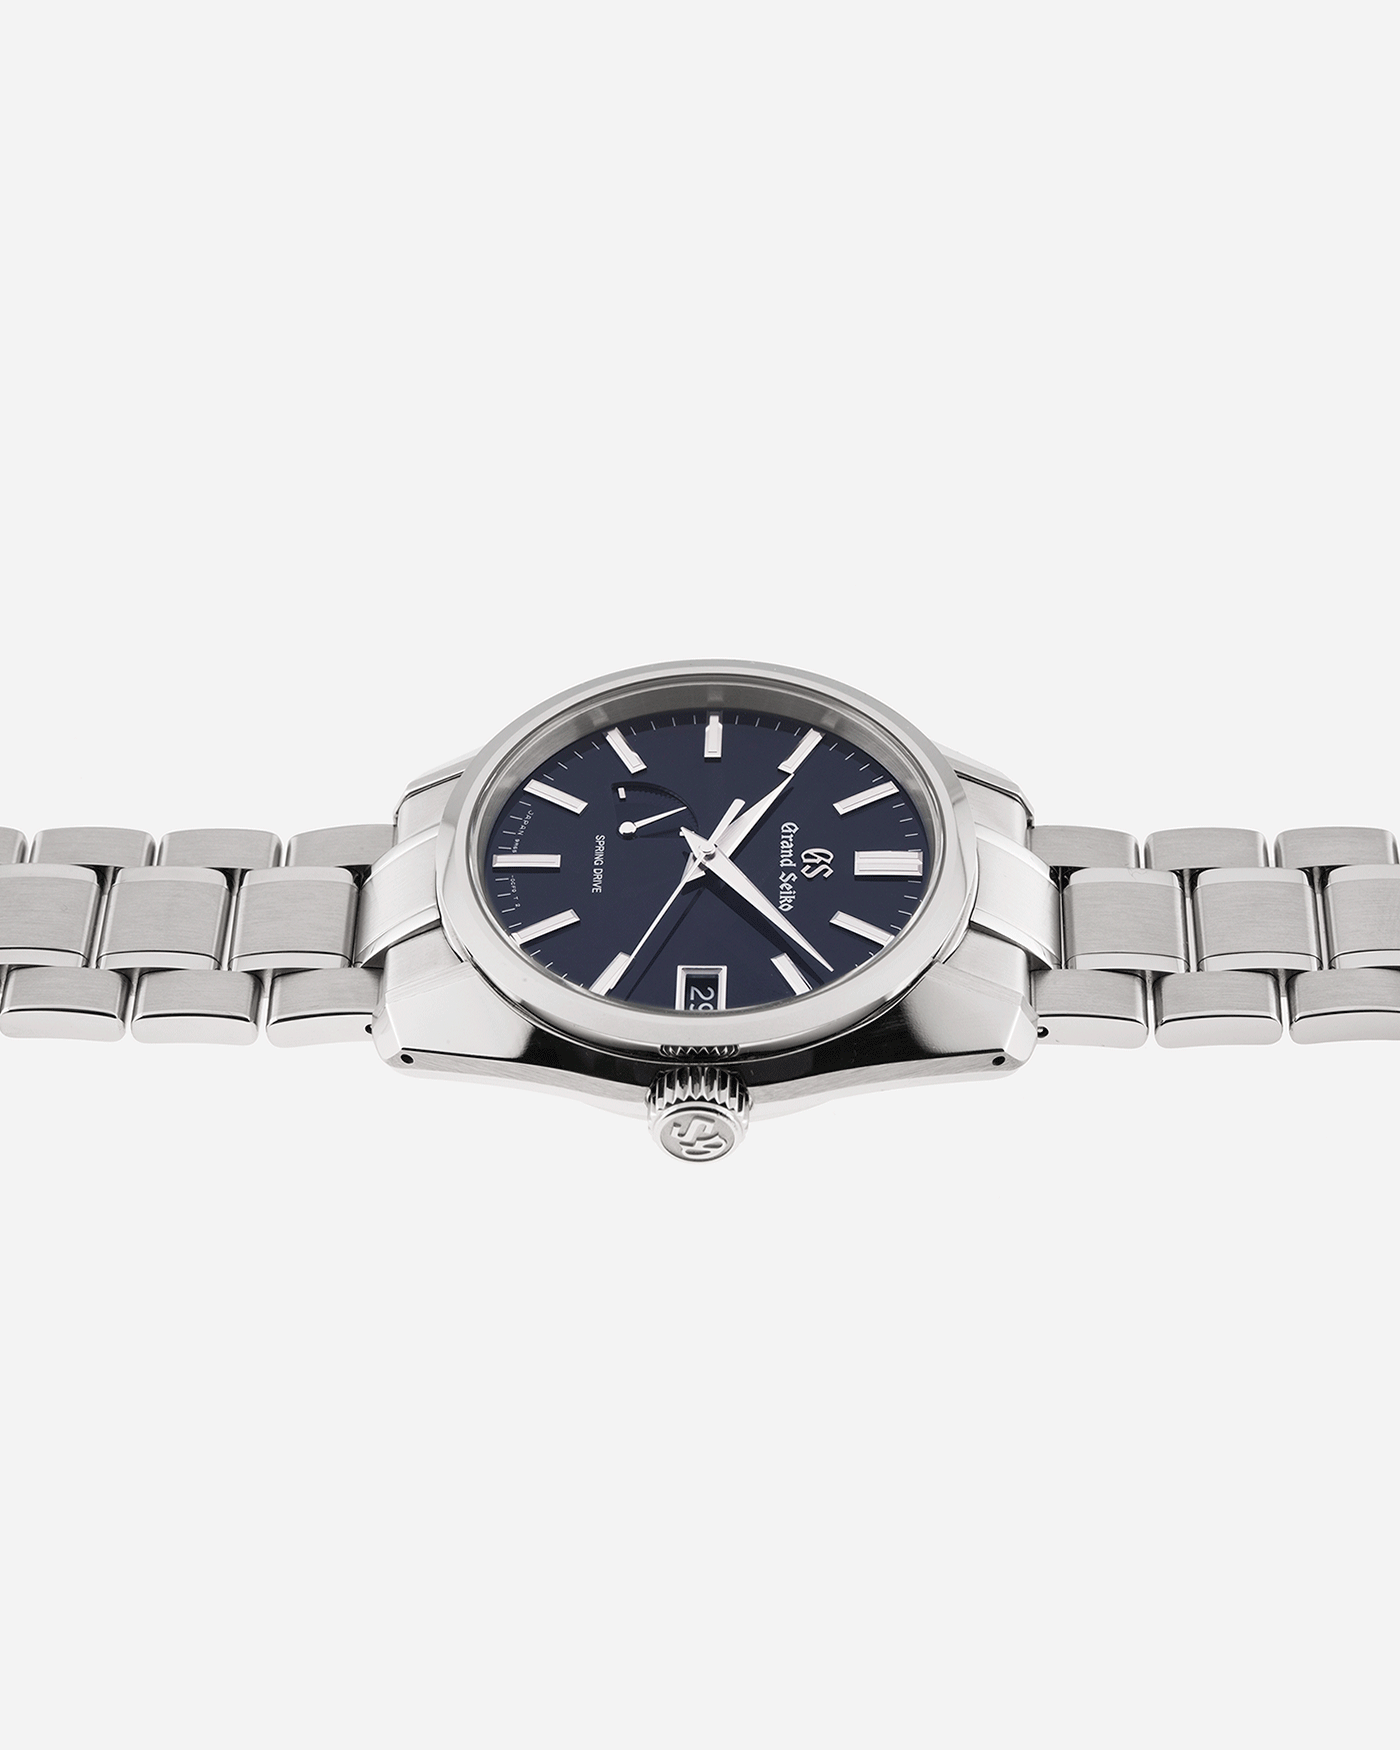 Brand: Grand Seiko Year: 2019 Reference Number: SBGA375 Spring Drive Material: Stainless Steel Movement: Cal 9R65 Case Diameter: 40mm Bracelet: Grand Seiko Stainless Steel Bracelet